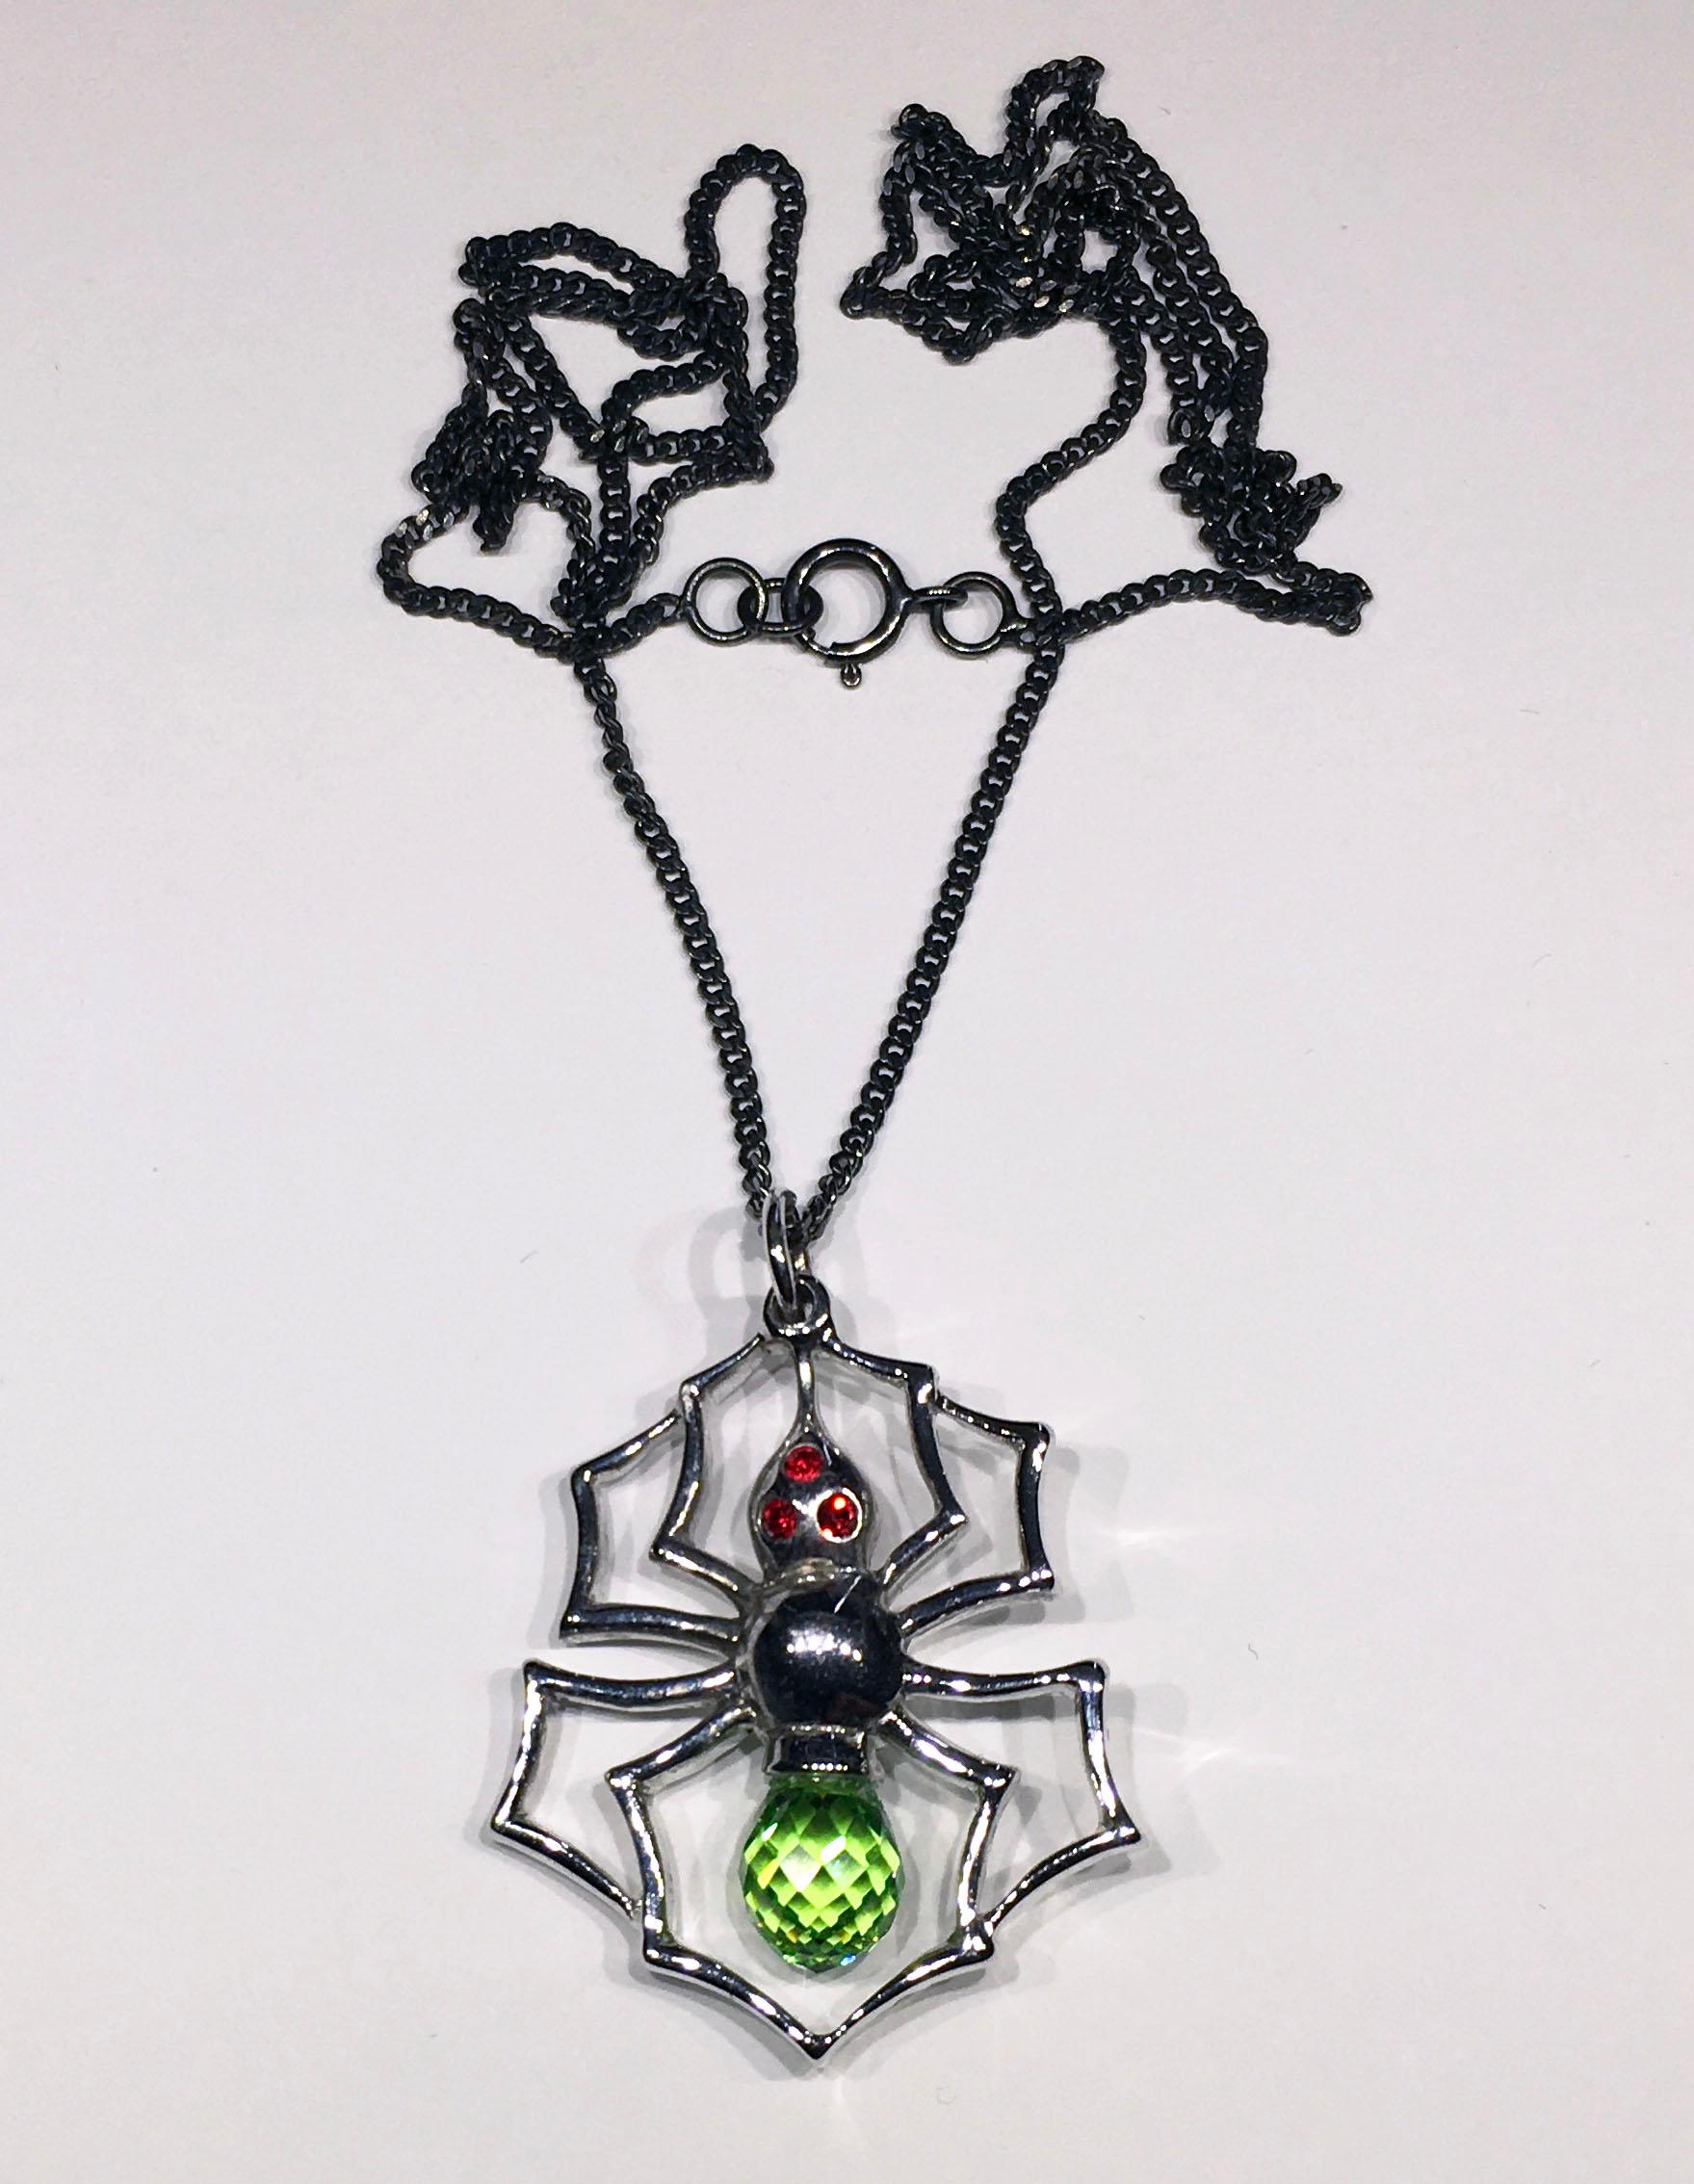 A Blackened Silver Spider Pendant with Cultured Green Sapphire Body, & Red Zirconia Eyes. This Pendant is hung from a Blackened Silver Chain of 20